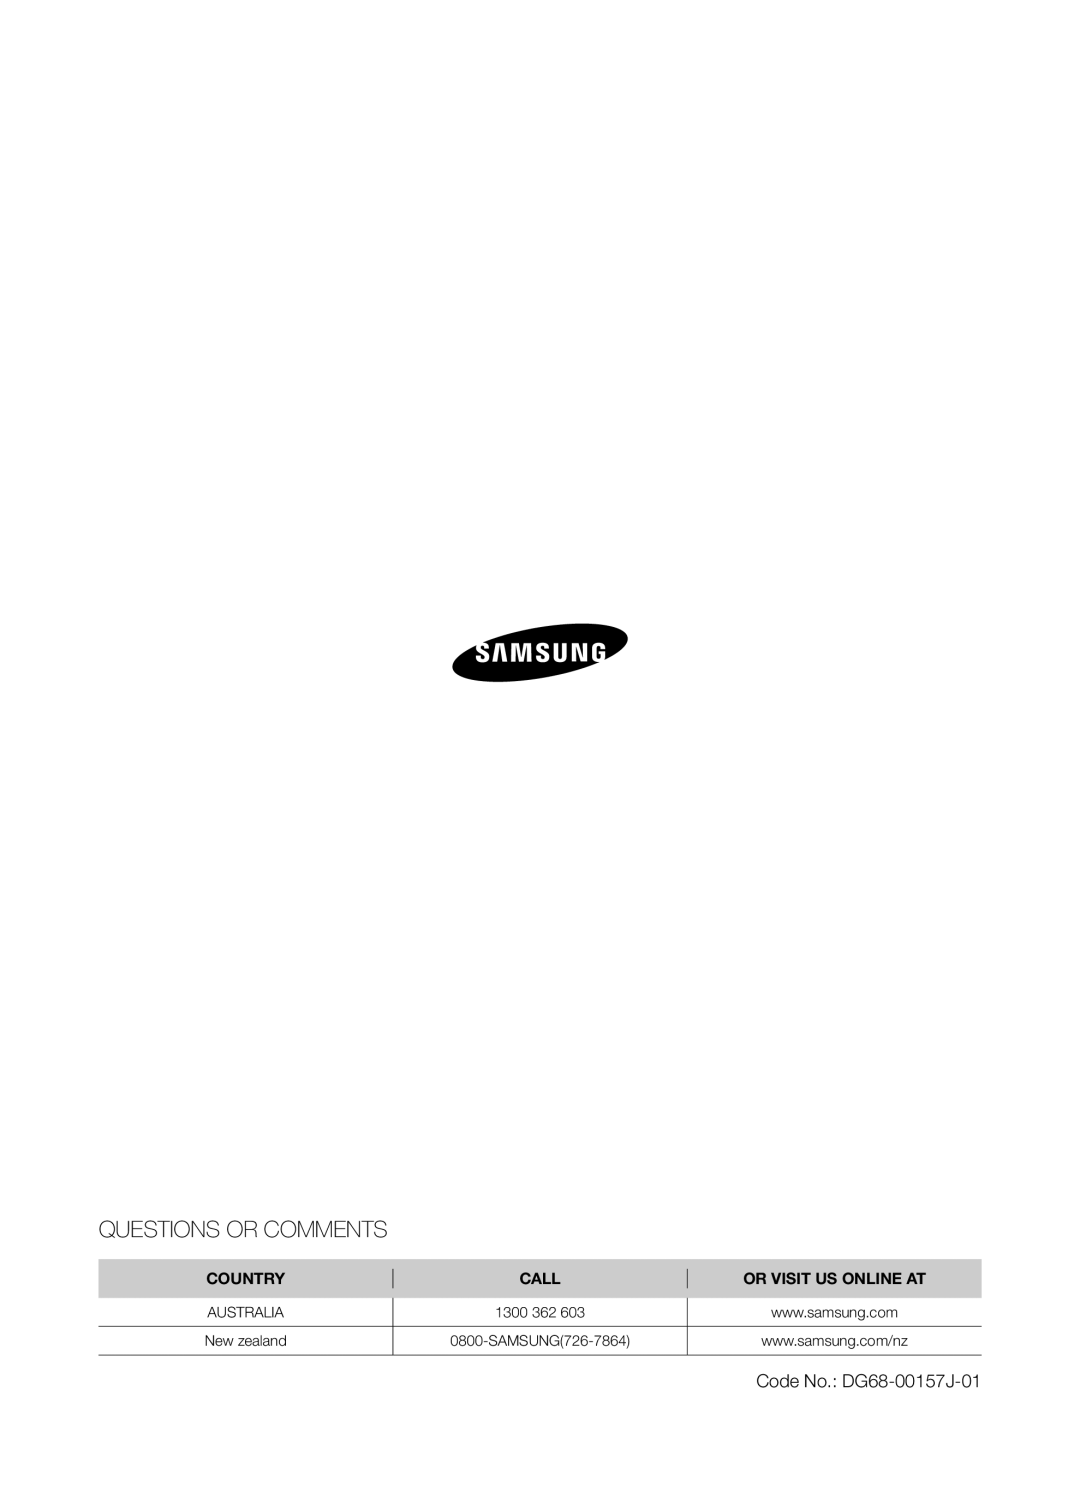 Samsung BF641 Series user manual Questions Or Comments, Country, Call, Or Visit Us Online At, Australia, 1300, New zealand 